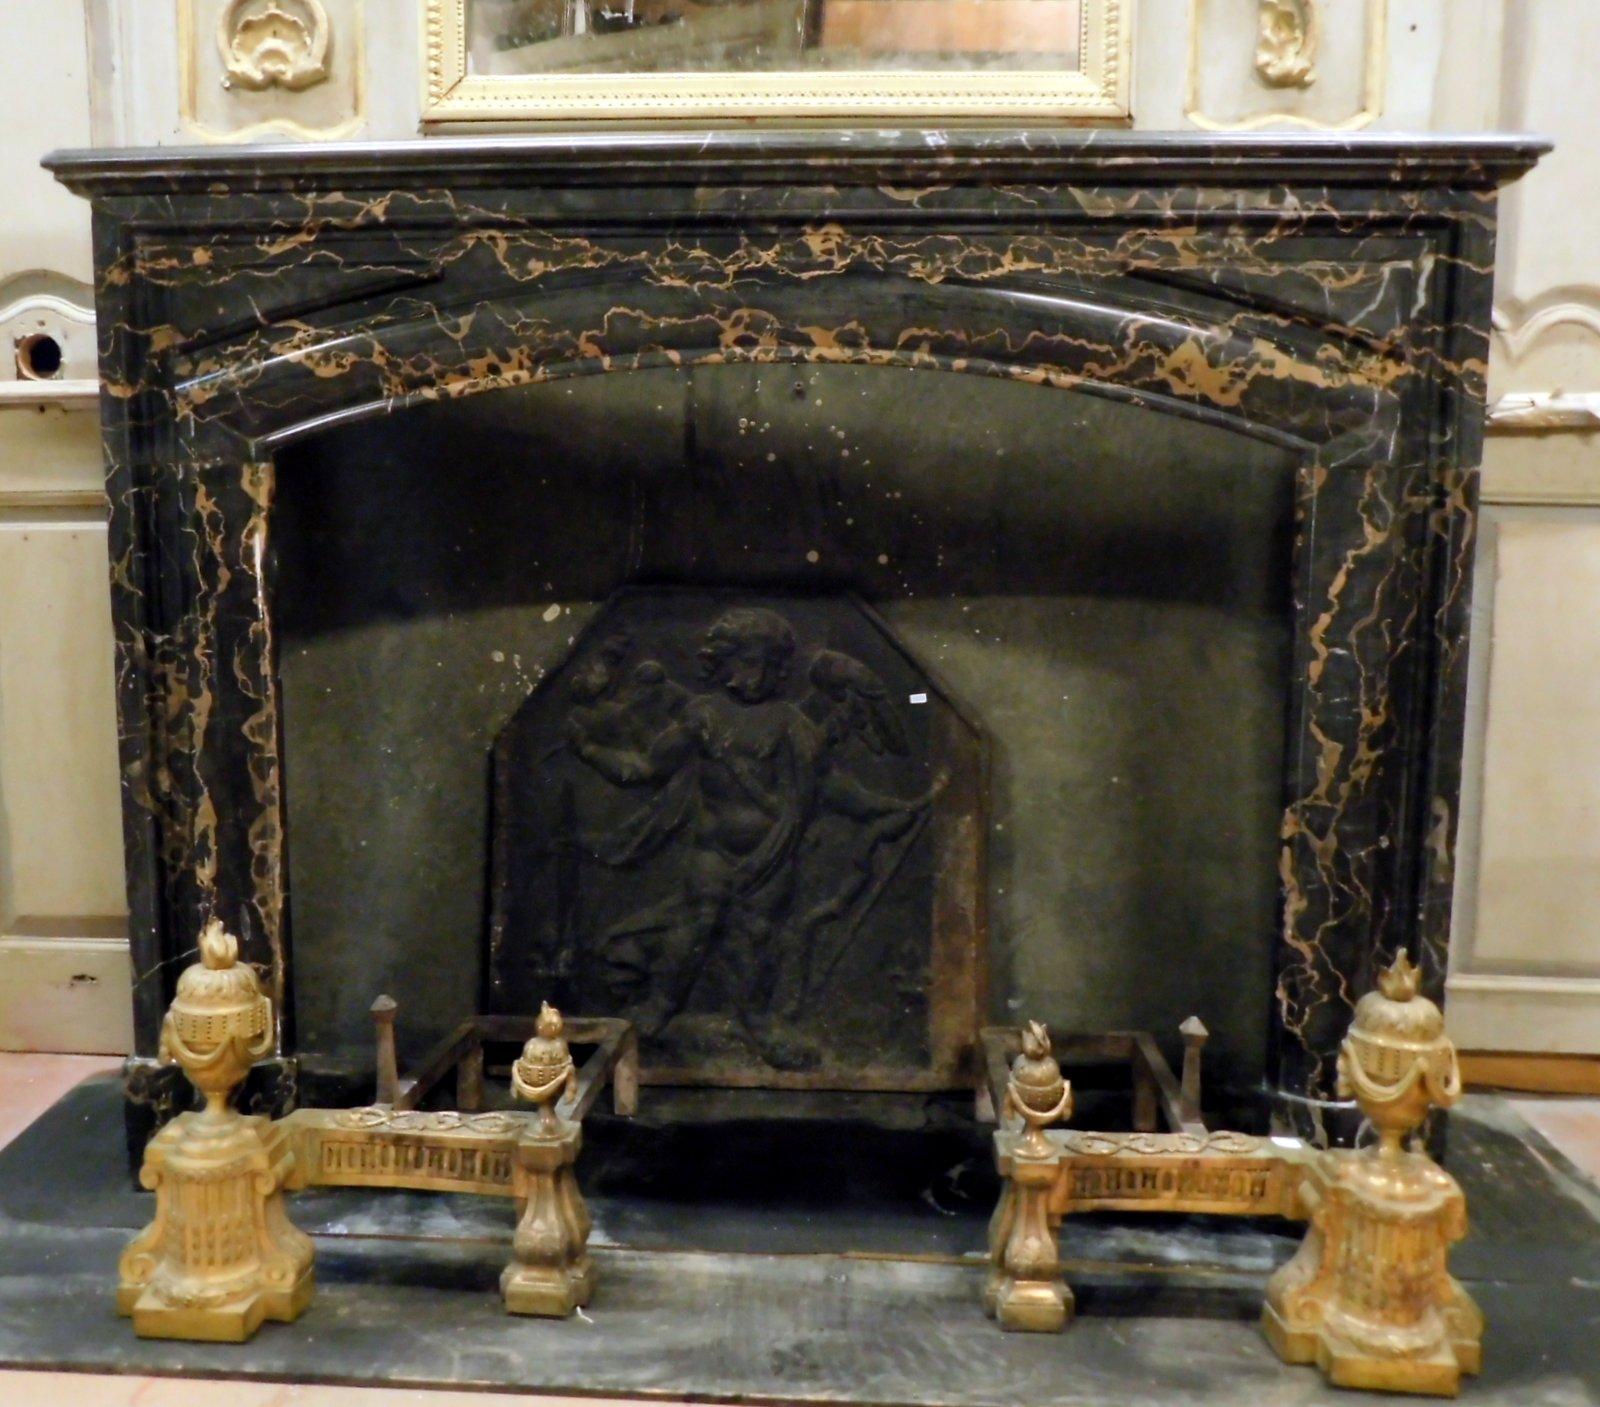 Antique mantel fireplace, carved with 